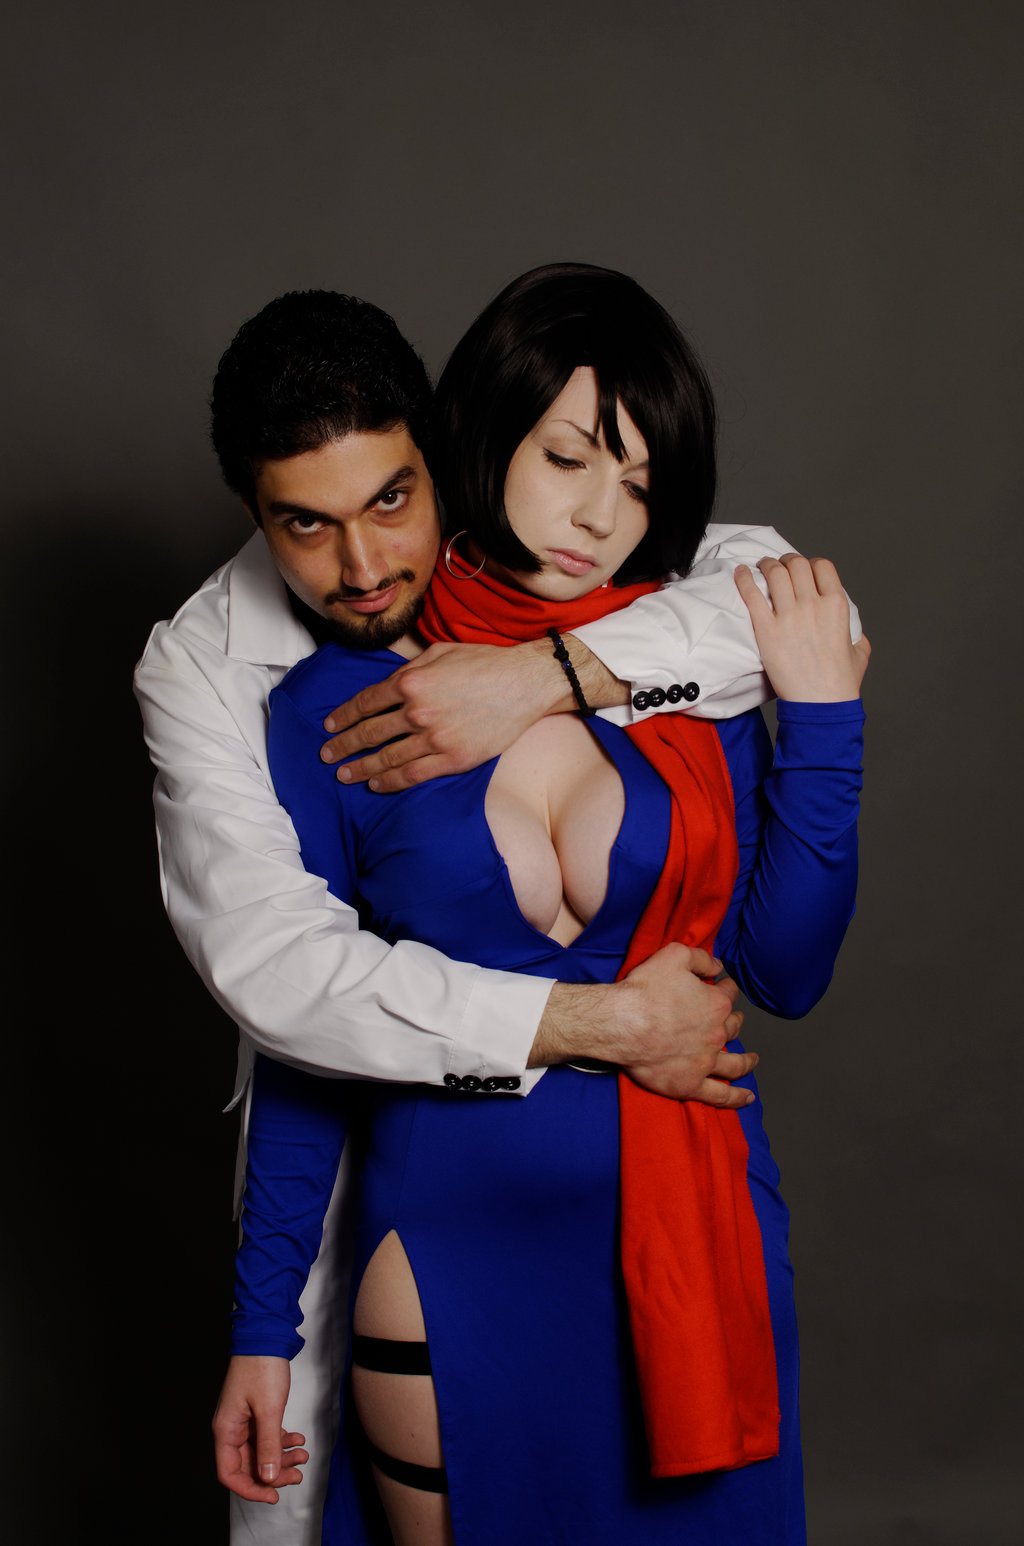 cosplay_carla_radames_and_derek_simmons_5_by_iamwesker-d7soiw6.